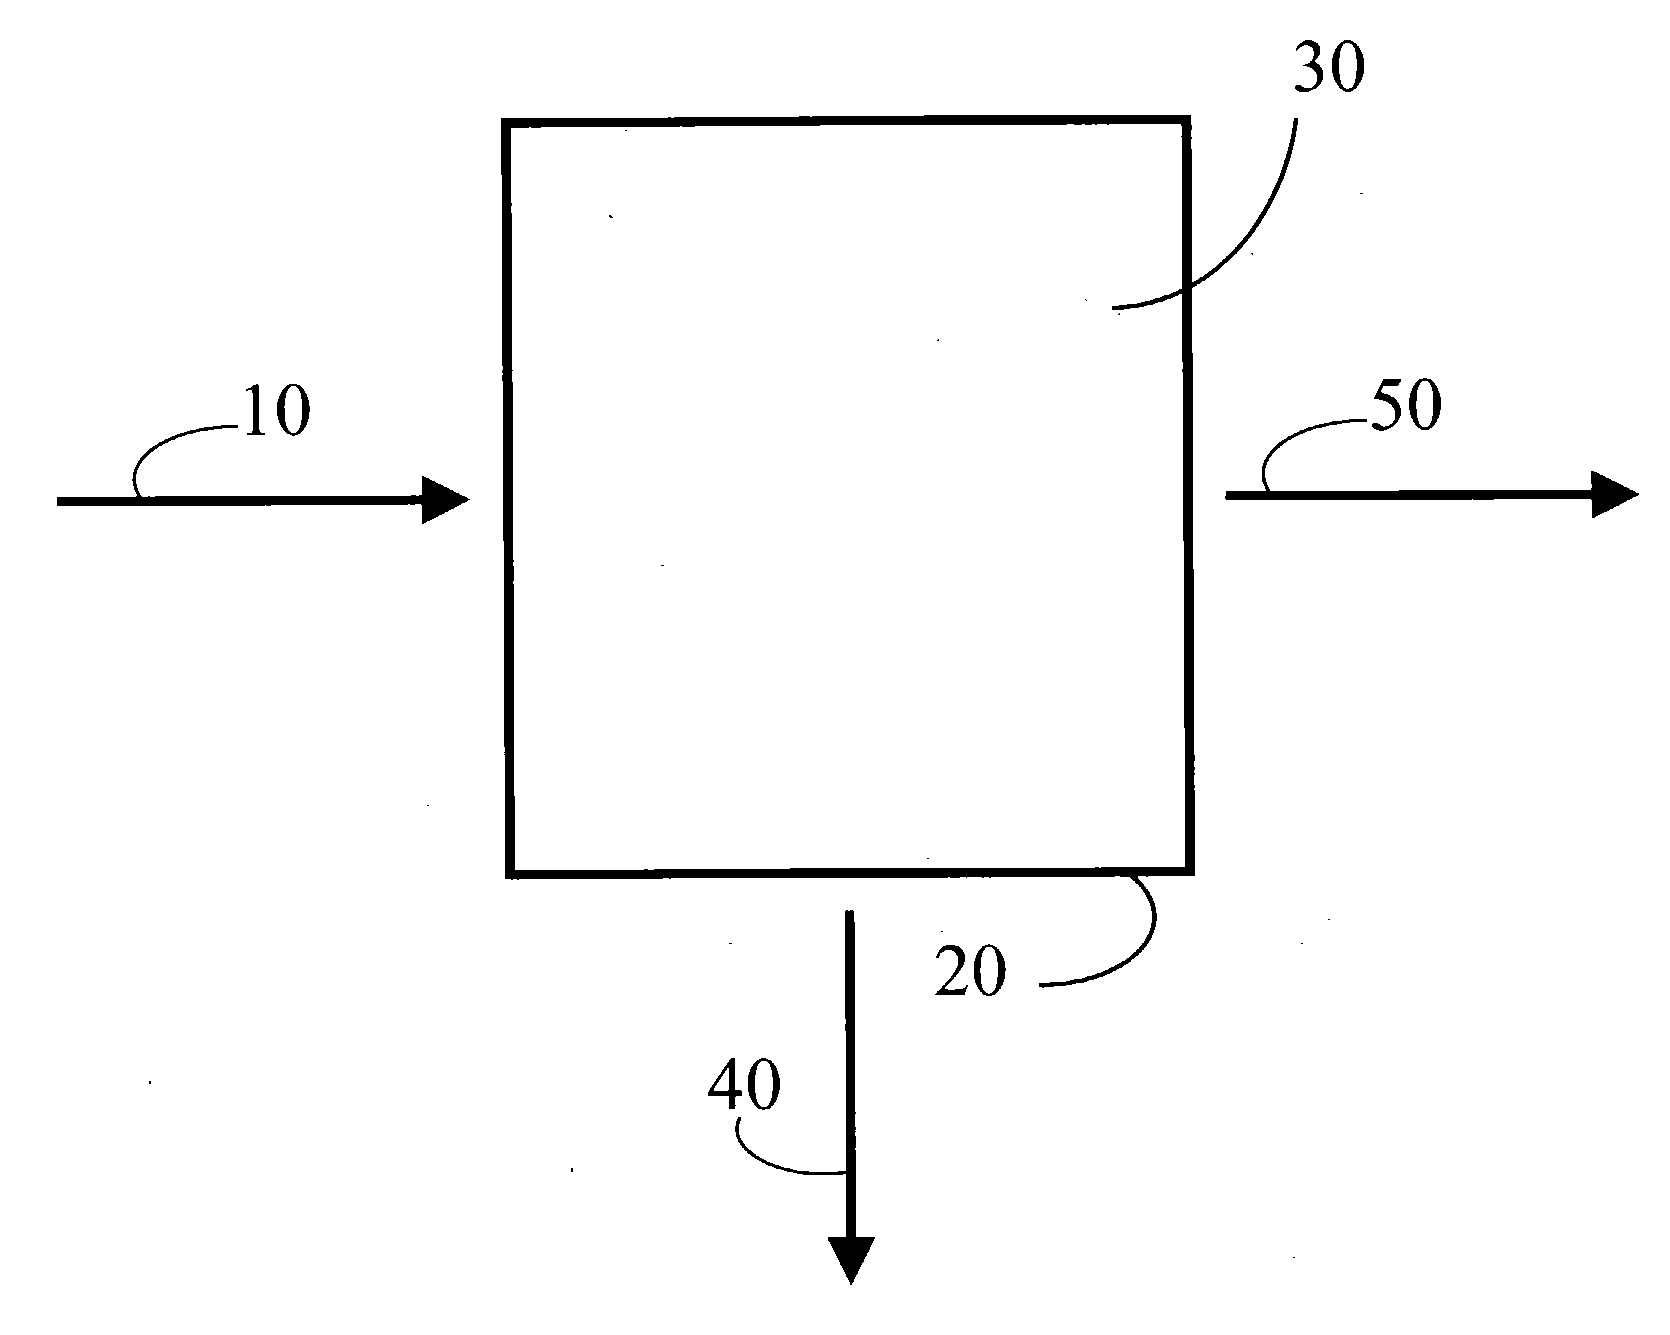 Method of removing mecury from exhaust gases